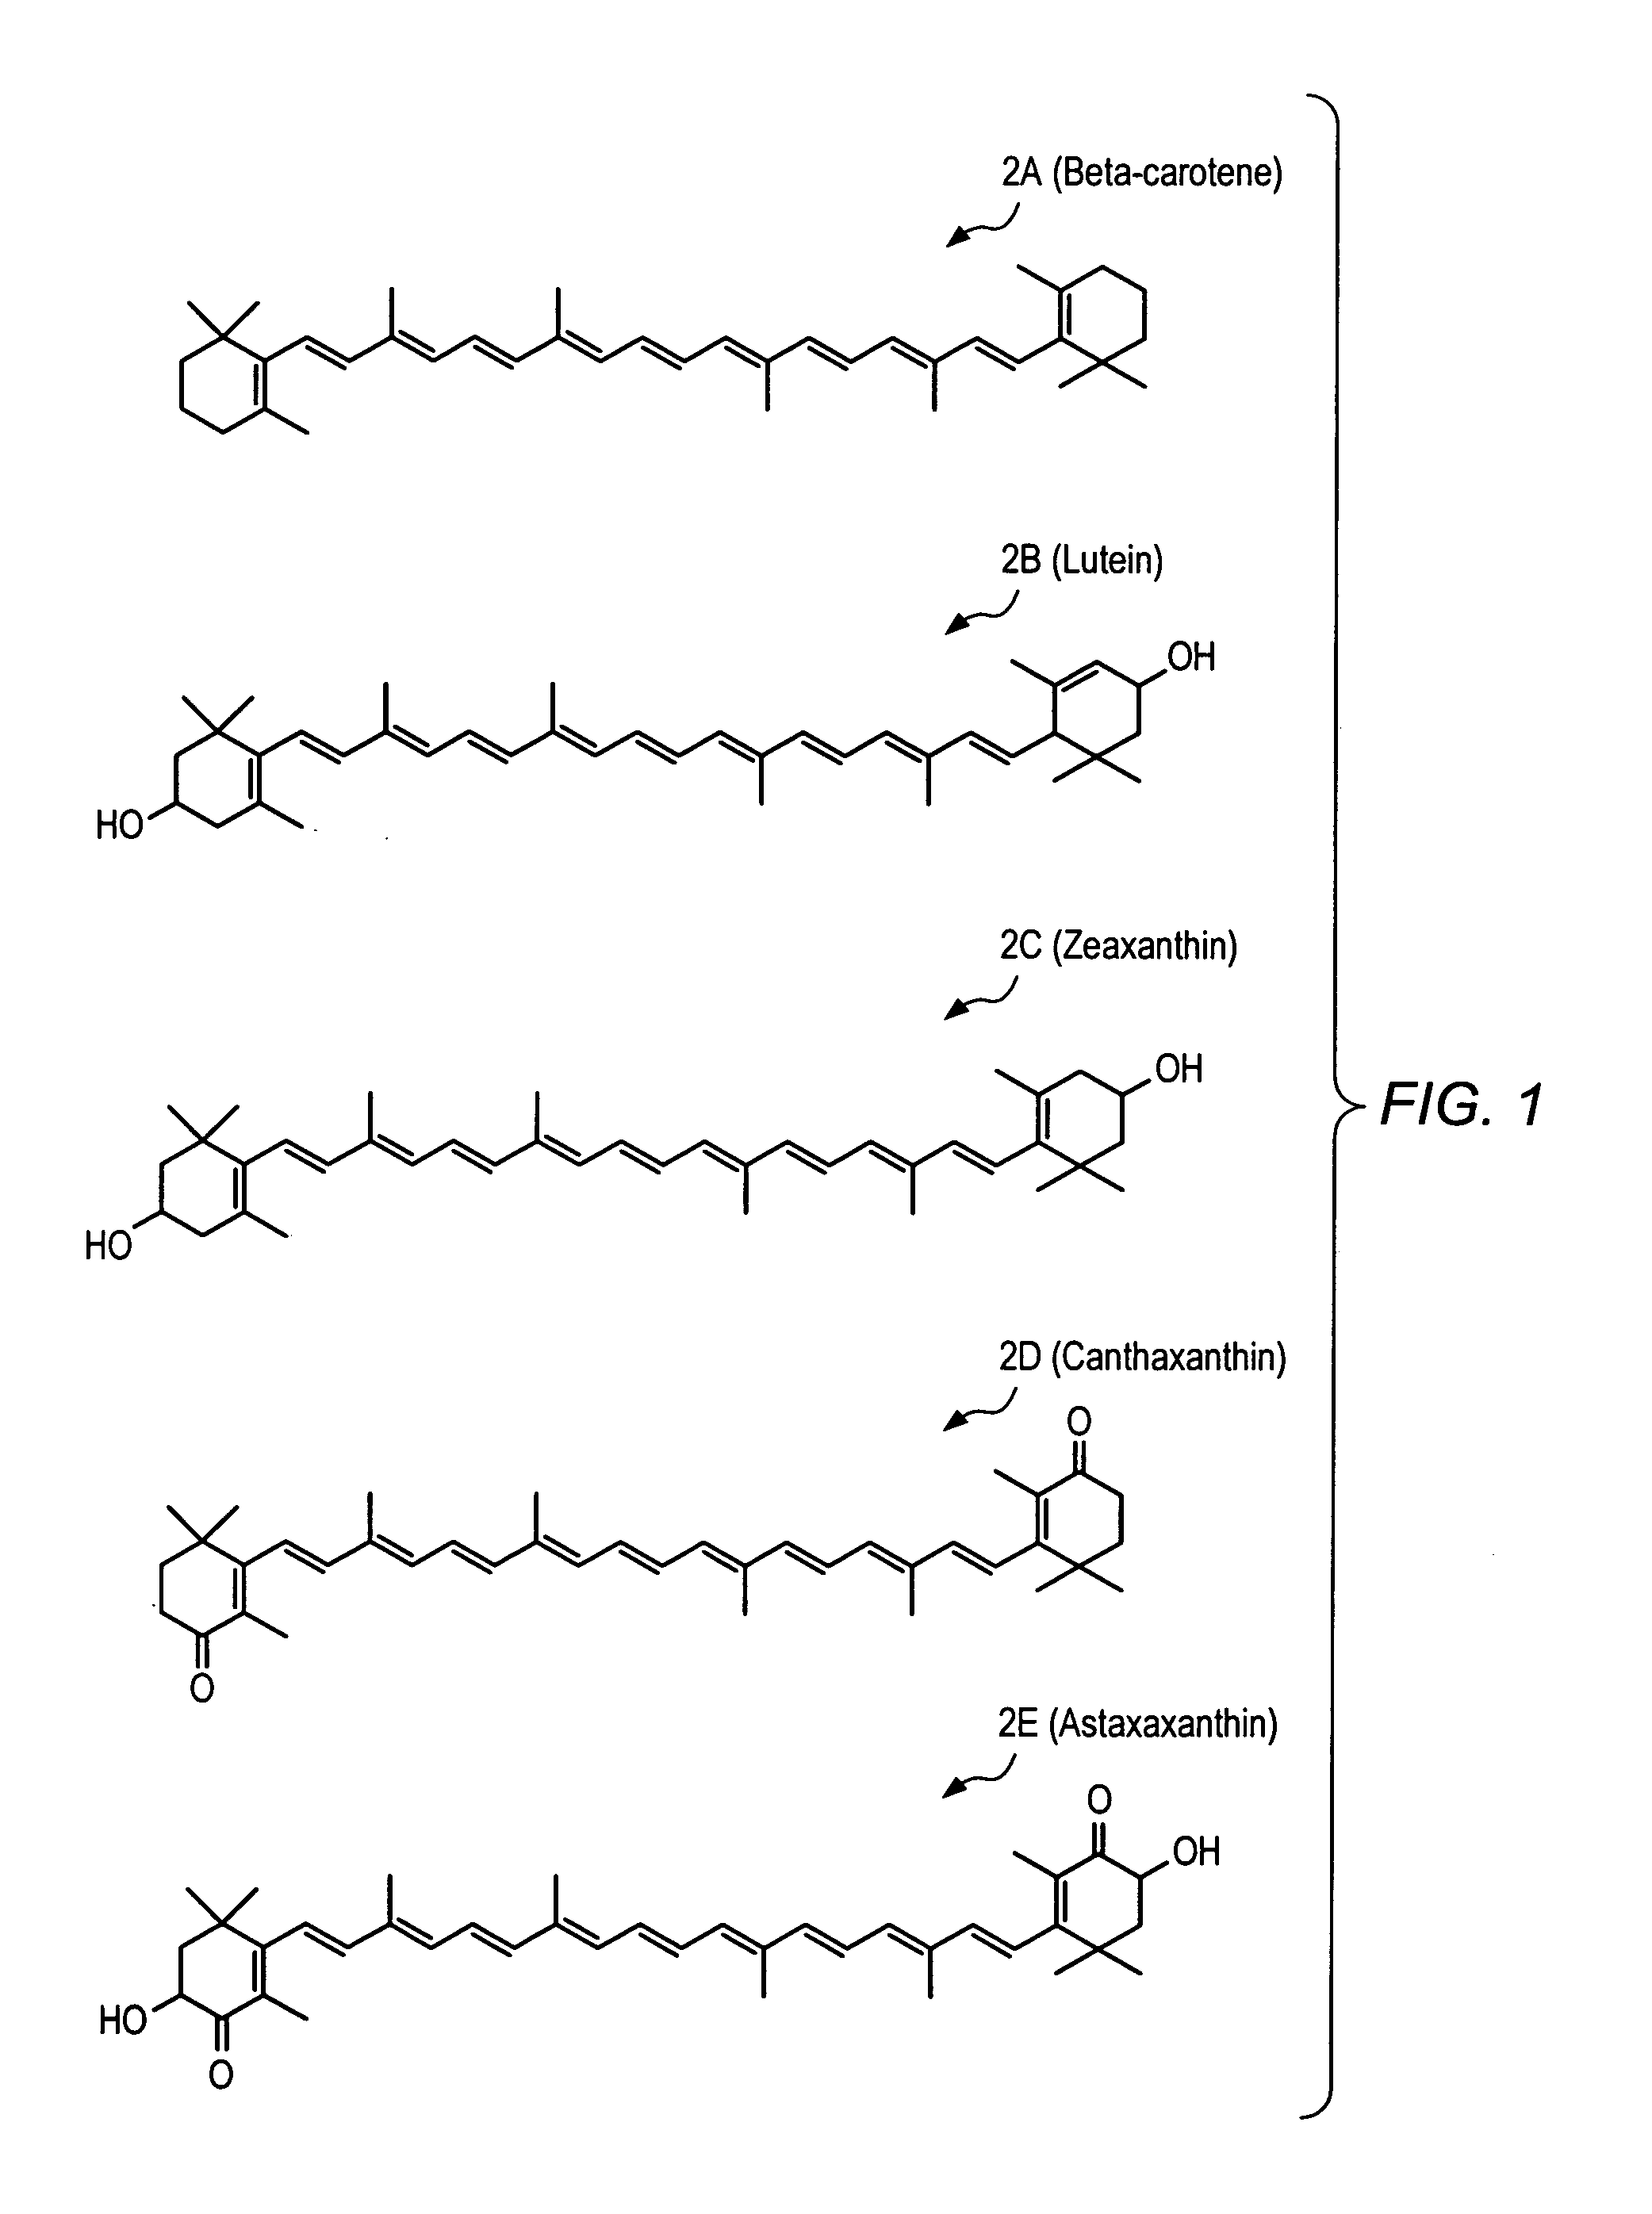 Carotenoid ether analogs or derivatives for controlling connexin 43 expression